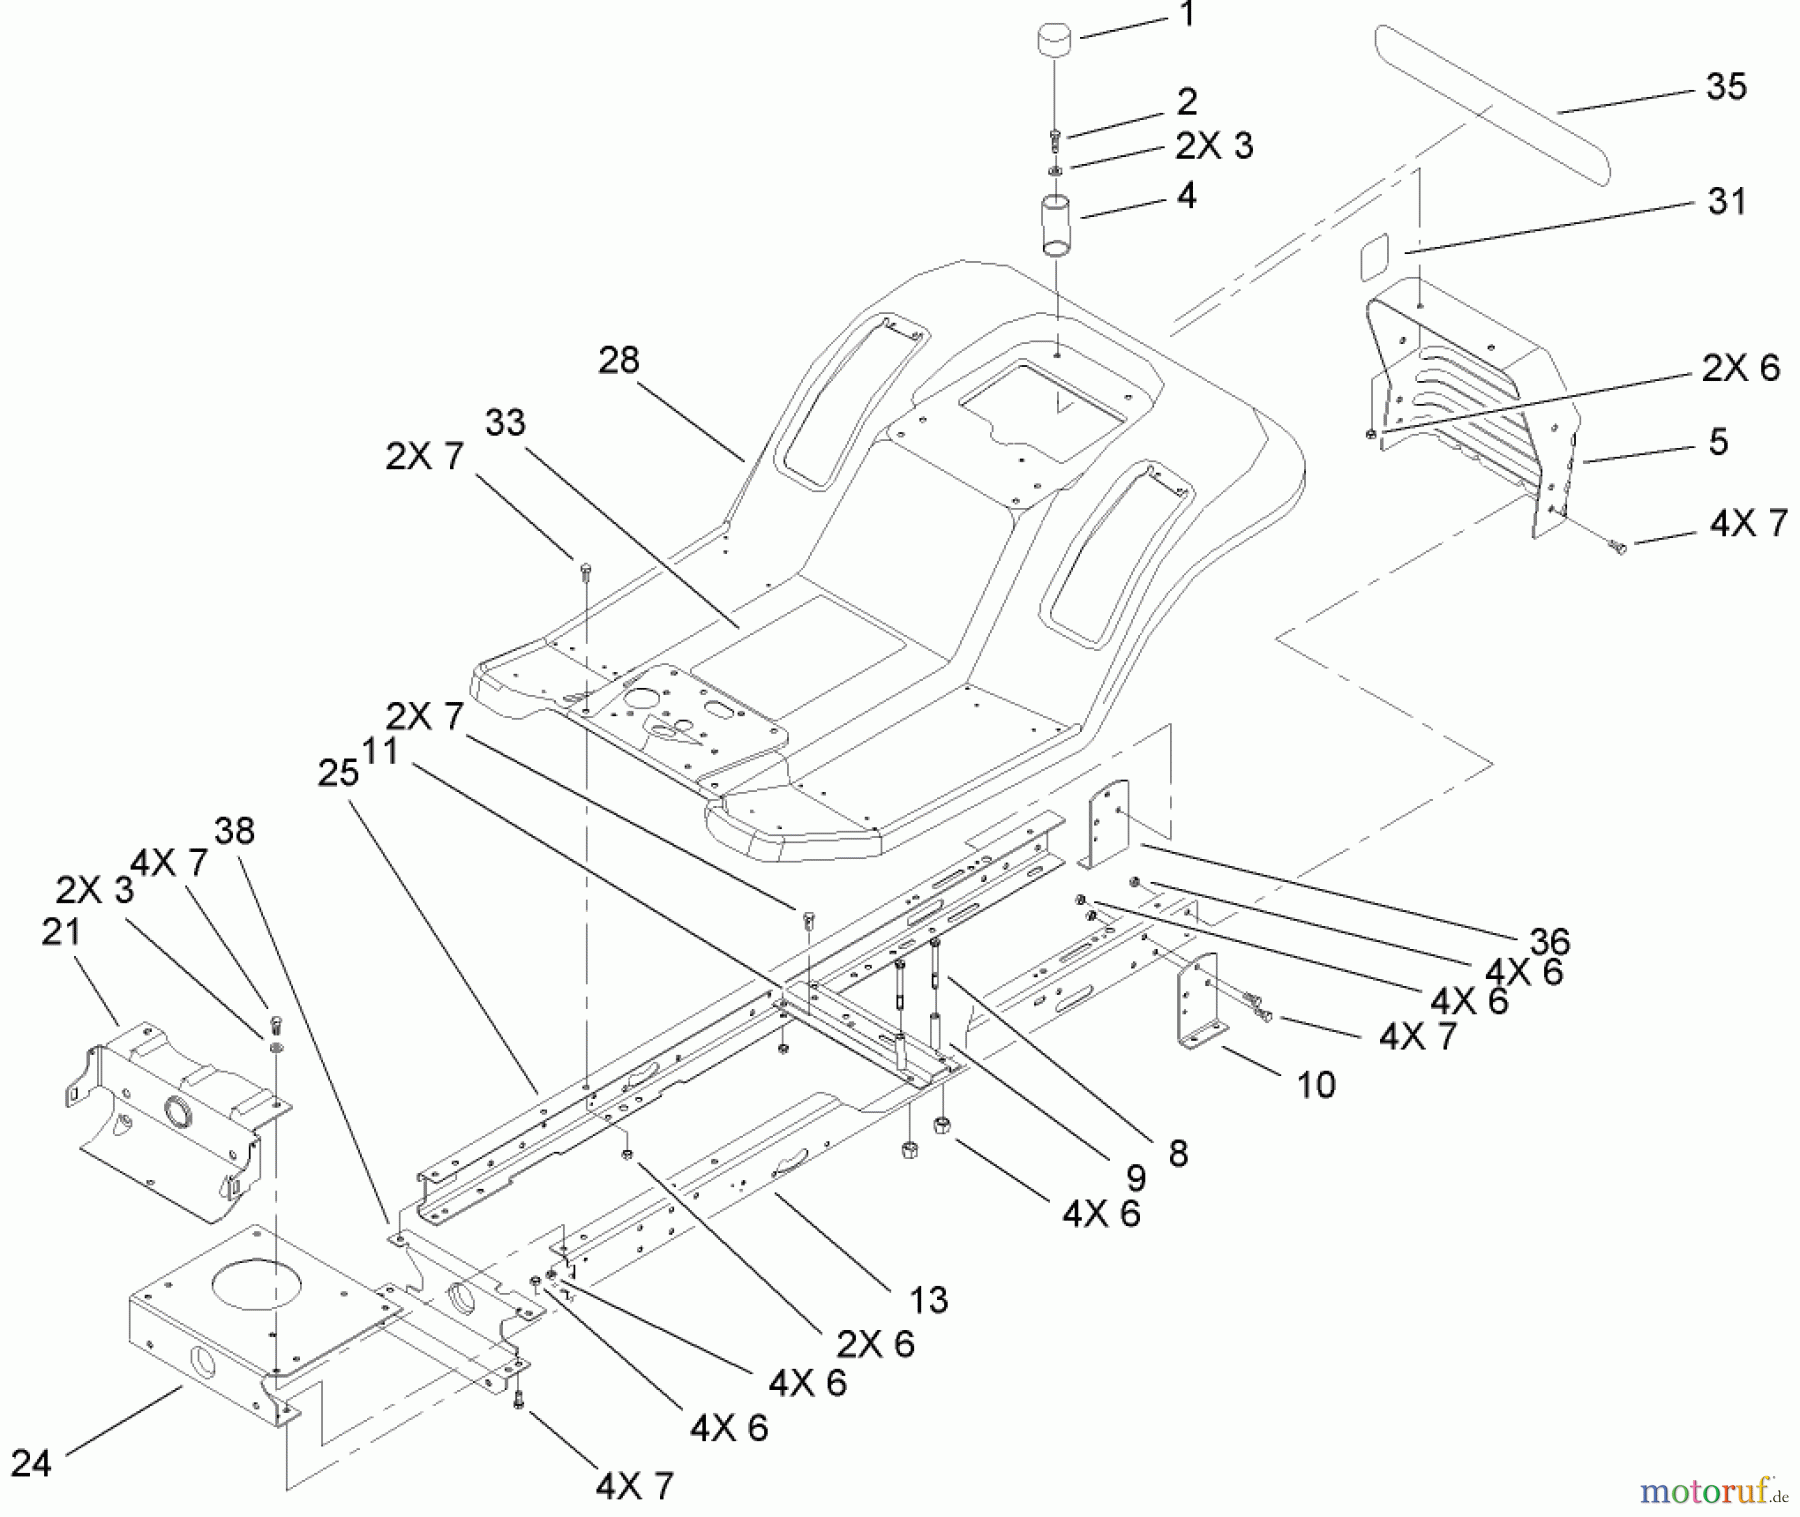  Toro Neu Mowers, Lawn & Garden Tractor Seite 1 71253 (XL 440H) - Toro XL 440H Lawn Tractor, 2010 (310000001-310999999) FRAME AND BODY ASSEMBLY